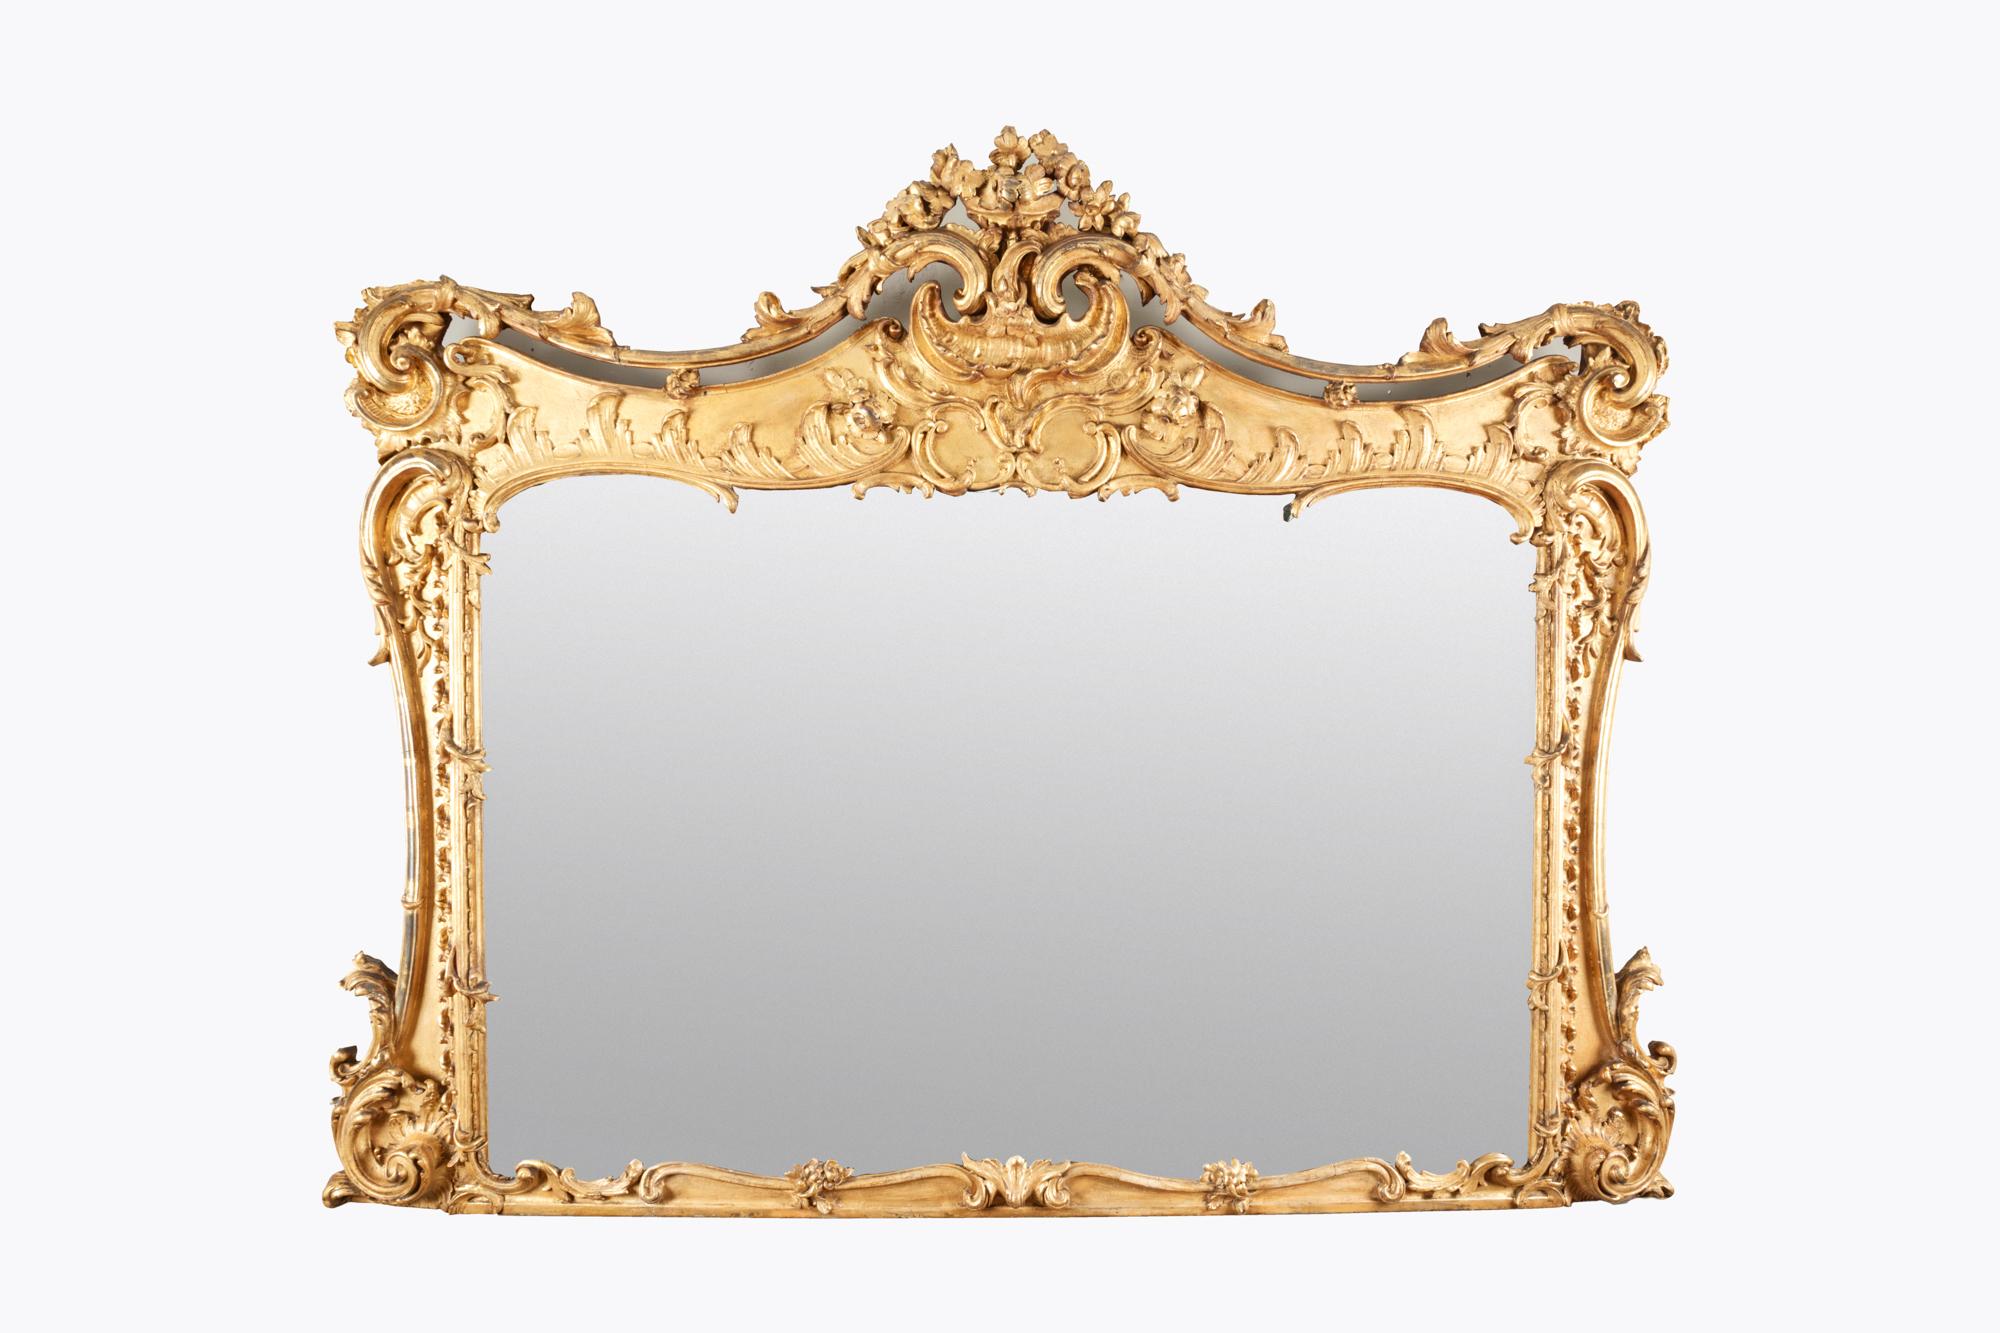 English Large 19th Century Ornate Gilt Chippendale-Style Overmantle Mirror